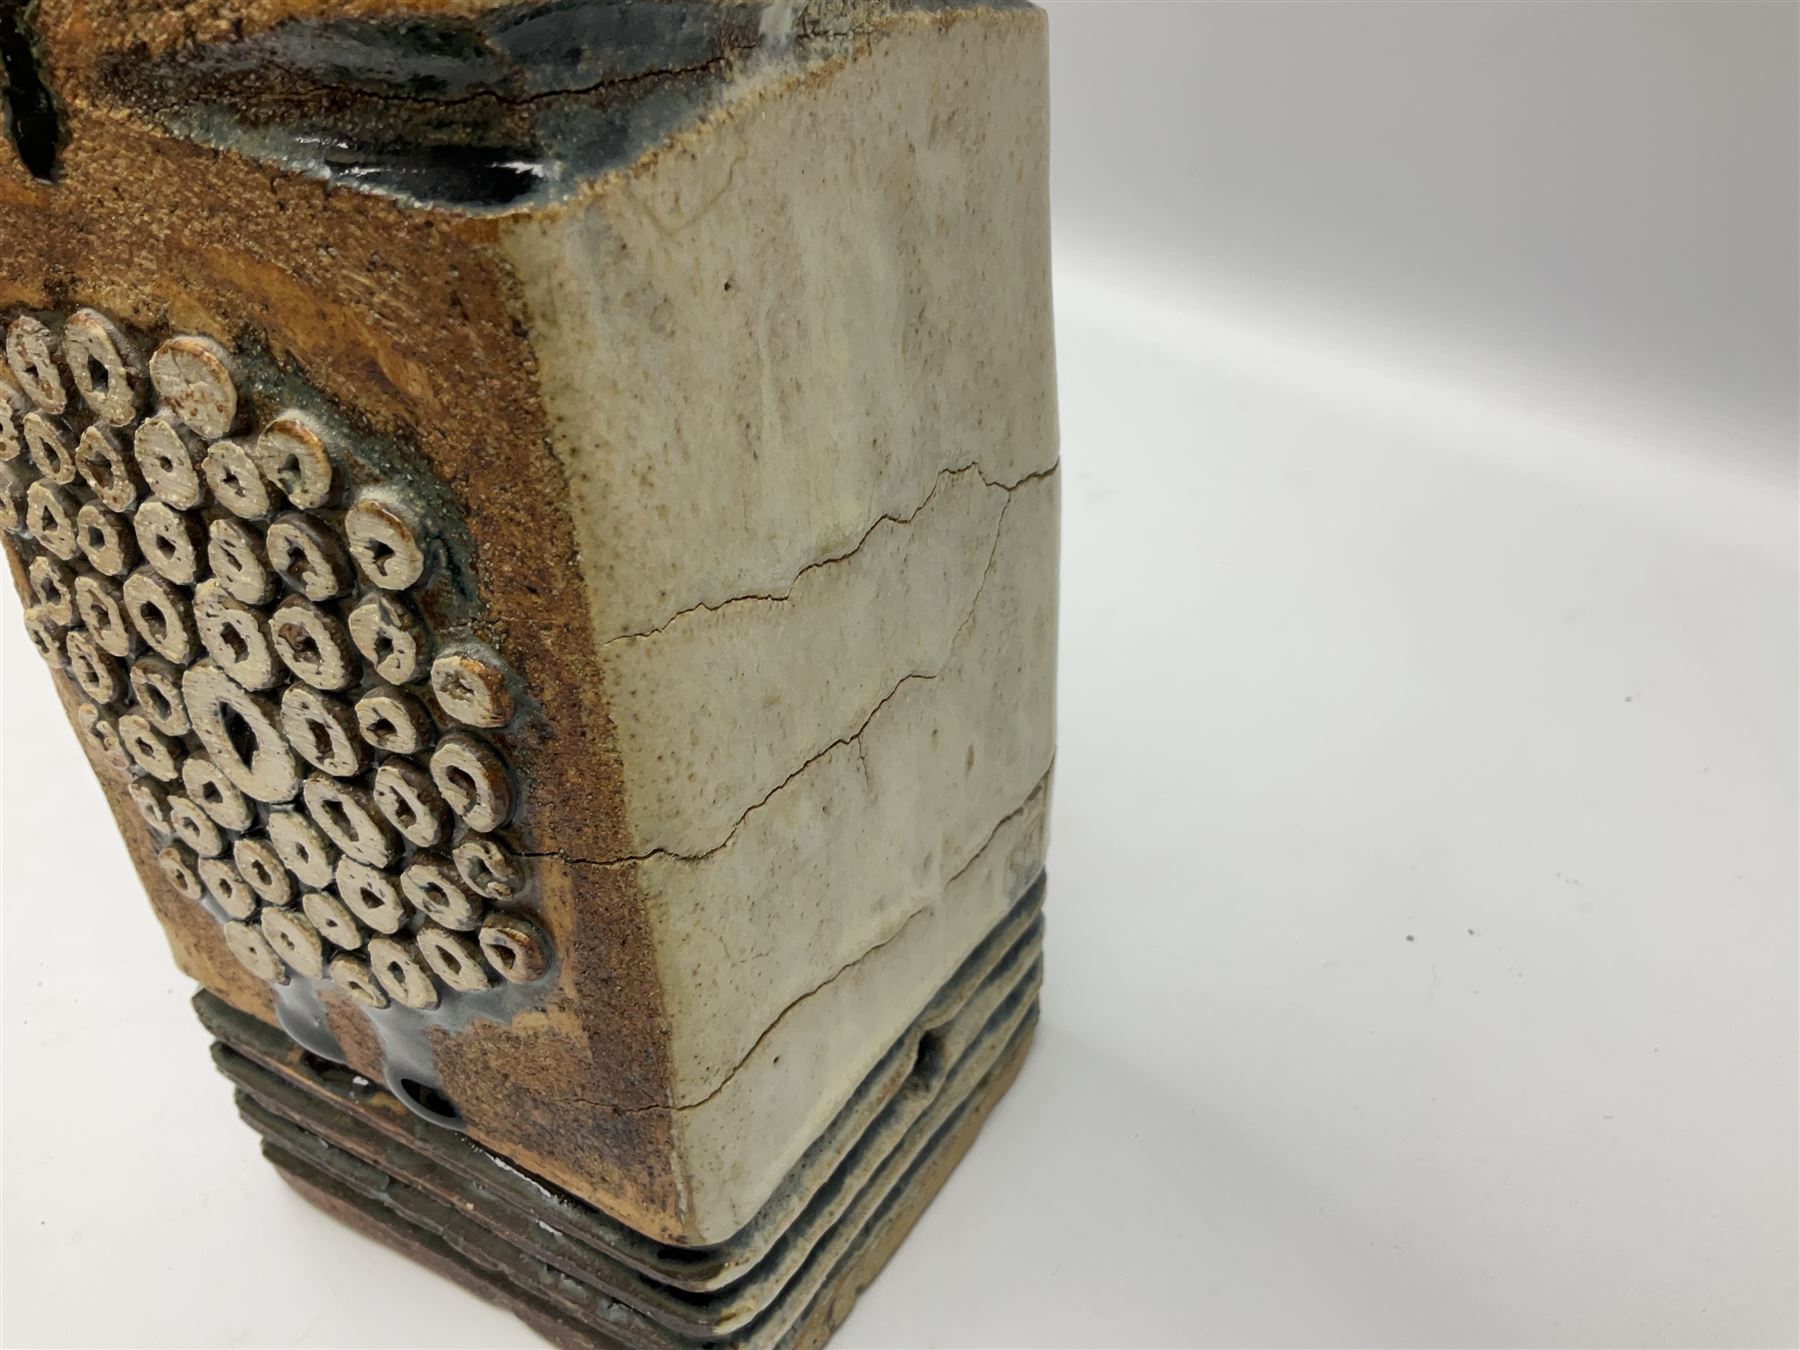 Studio pottery table lamp of slab built and moulded form with applied floral and abstract motifs - Image 8 of 9